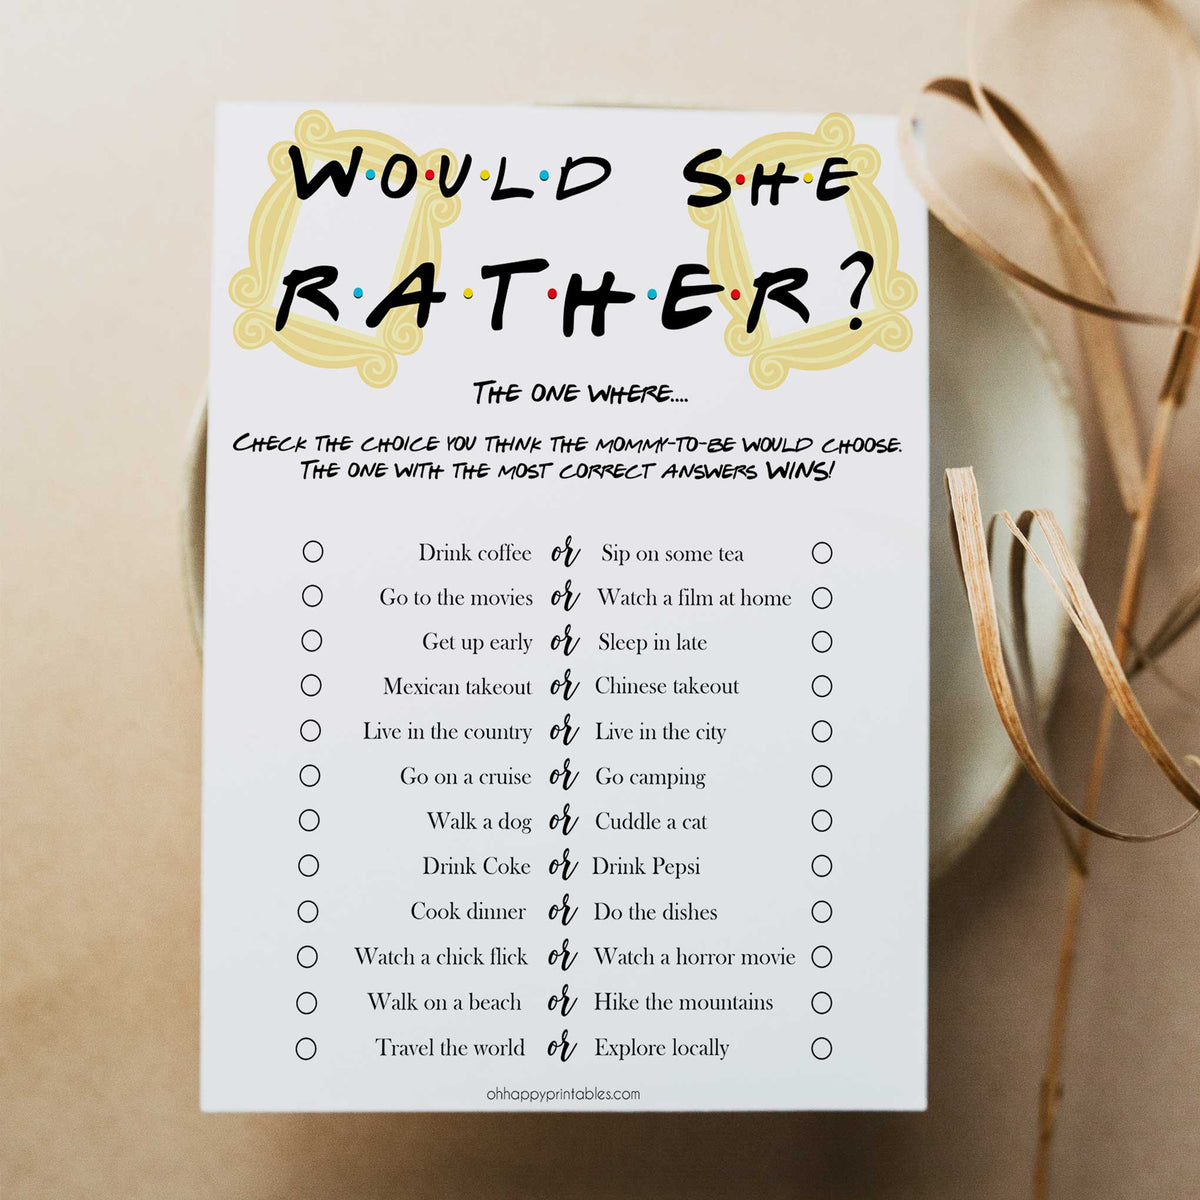 would she rather baby shower, Printable baby shower games, friends fun baby games, baby shower games, fun baby shower ideas, top baby shower ideas, friends baby shower, friends baby shower ideas